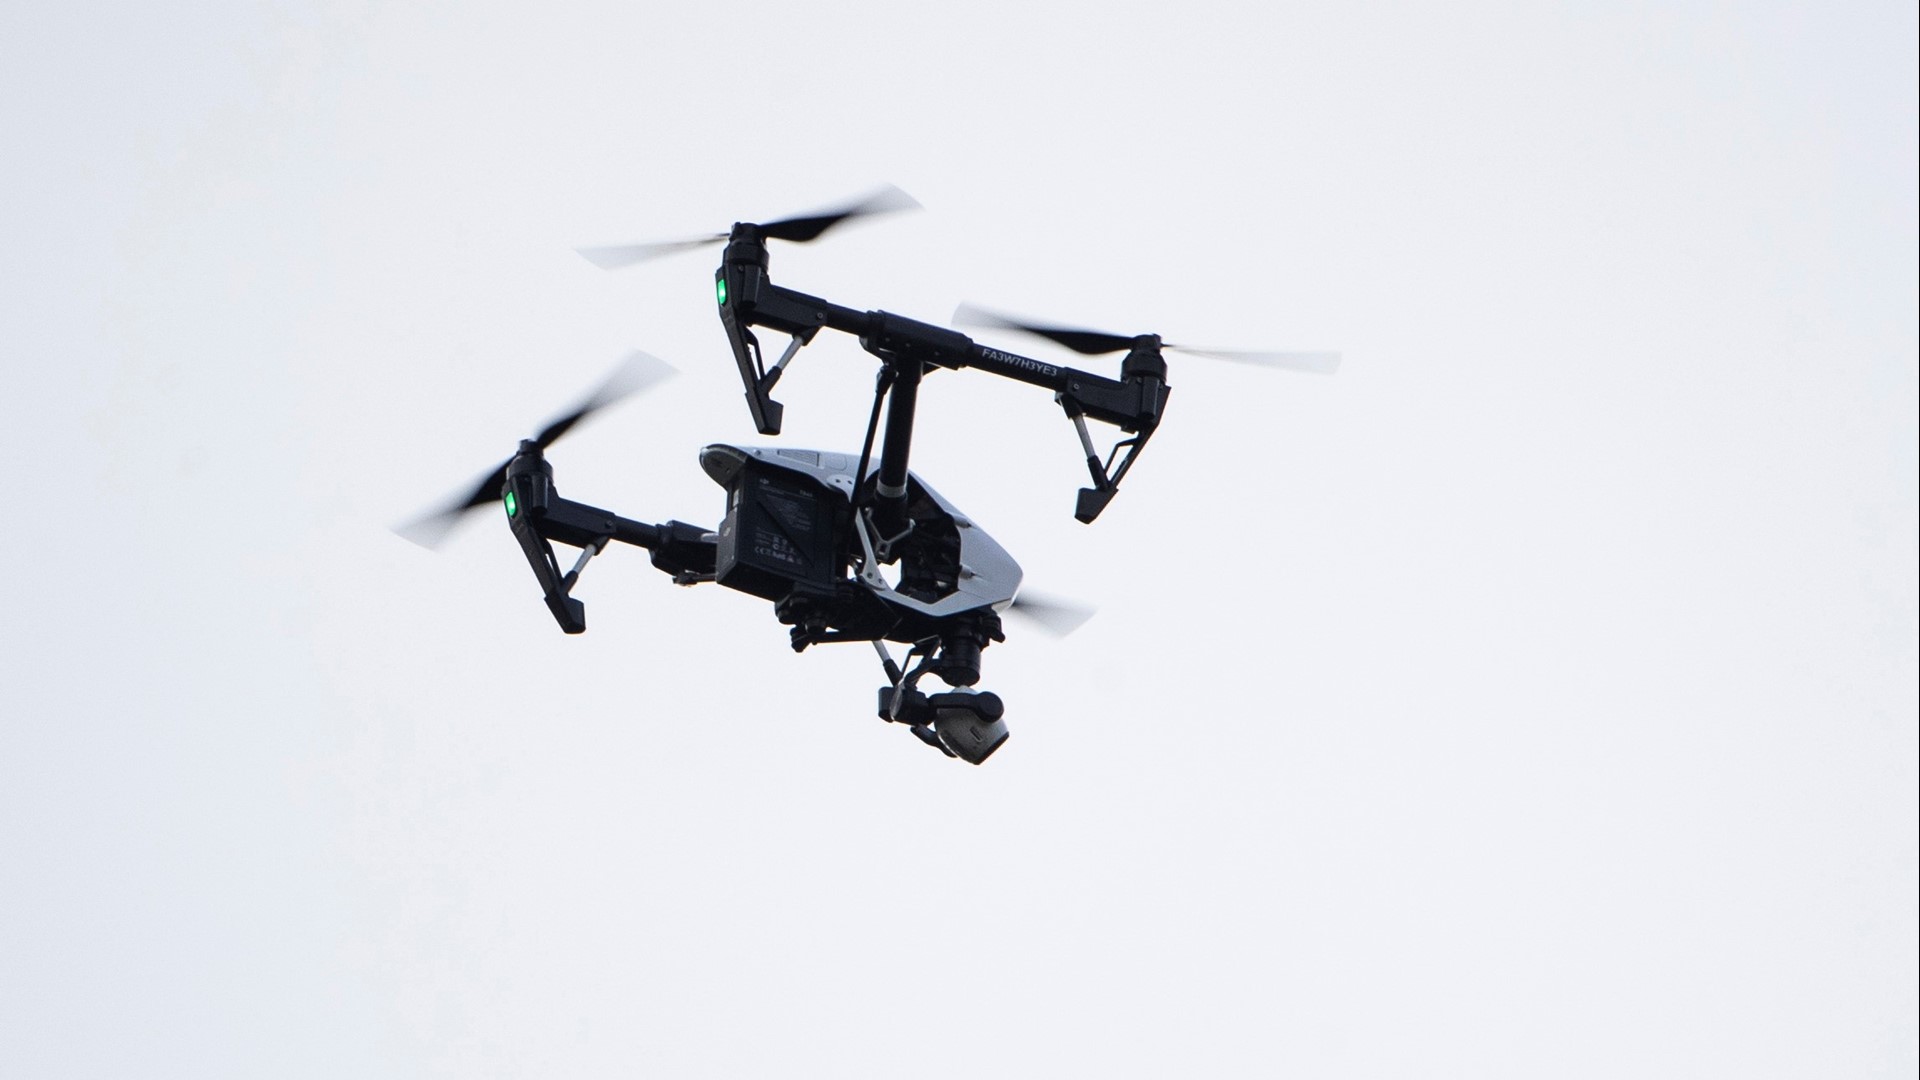 The study, conducted by UC Davis graduate students, looked at vaccine distribution optimization, including how well drones and unmanned vehicles can do it.